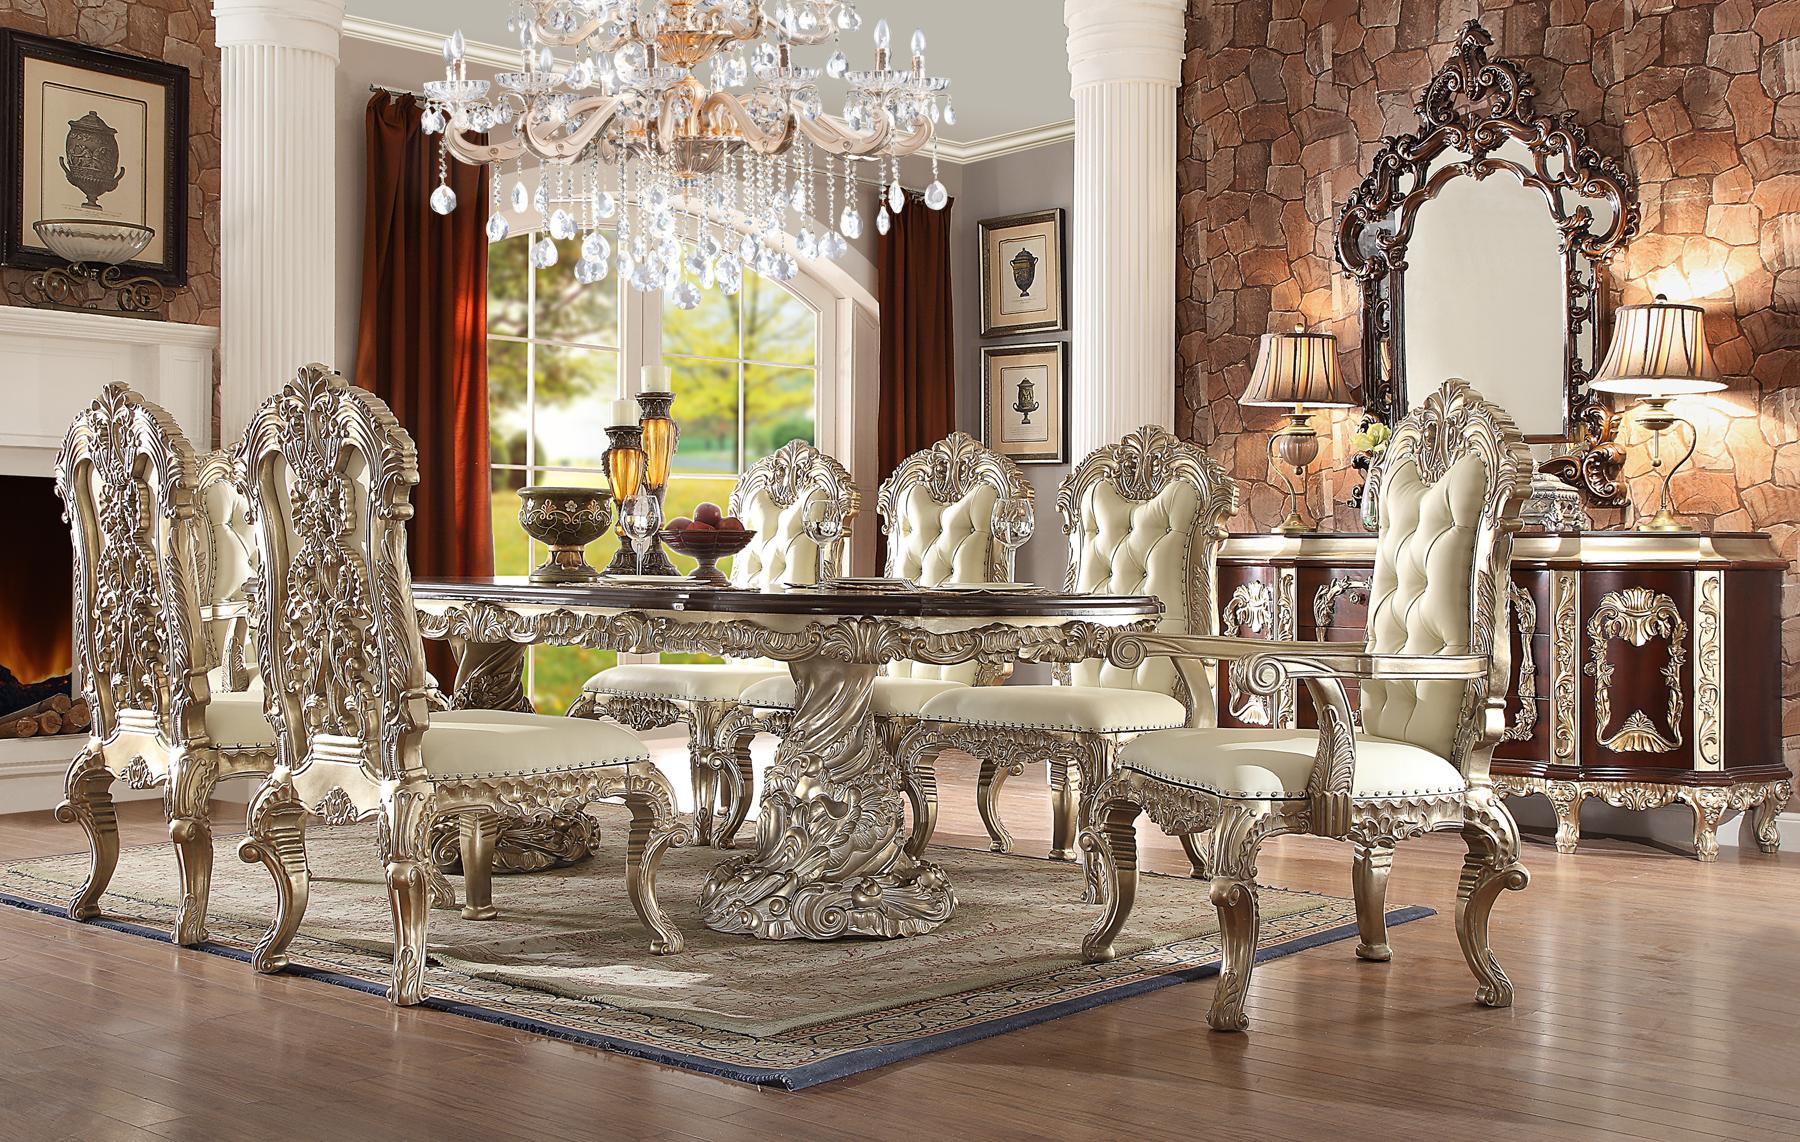 Traditional Dining Table Set HD-8017 – 7PC DINING TABLE SET HD-8017-DTSET7 in Antique White, Silver 